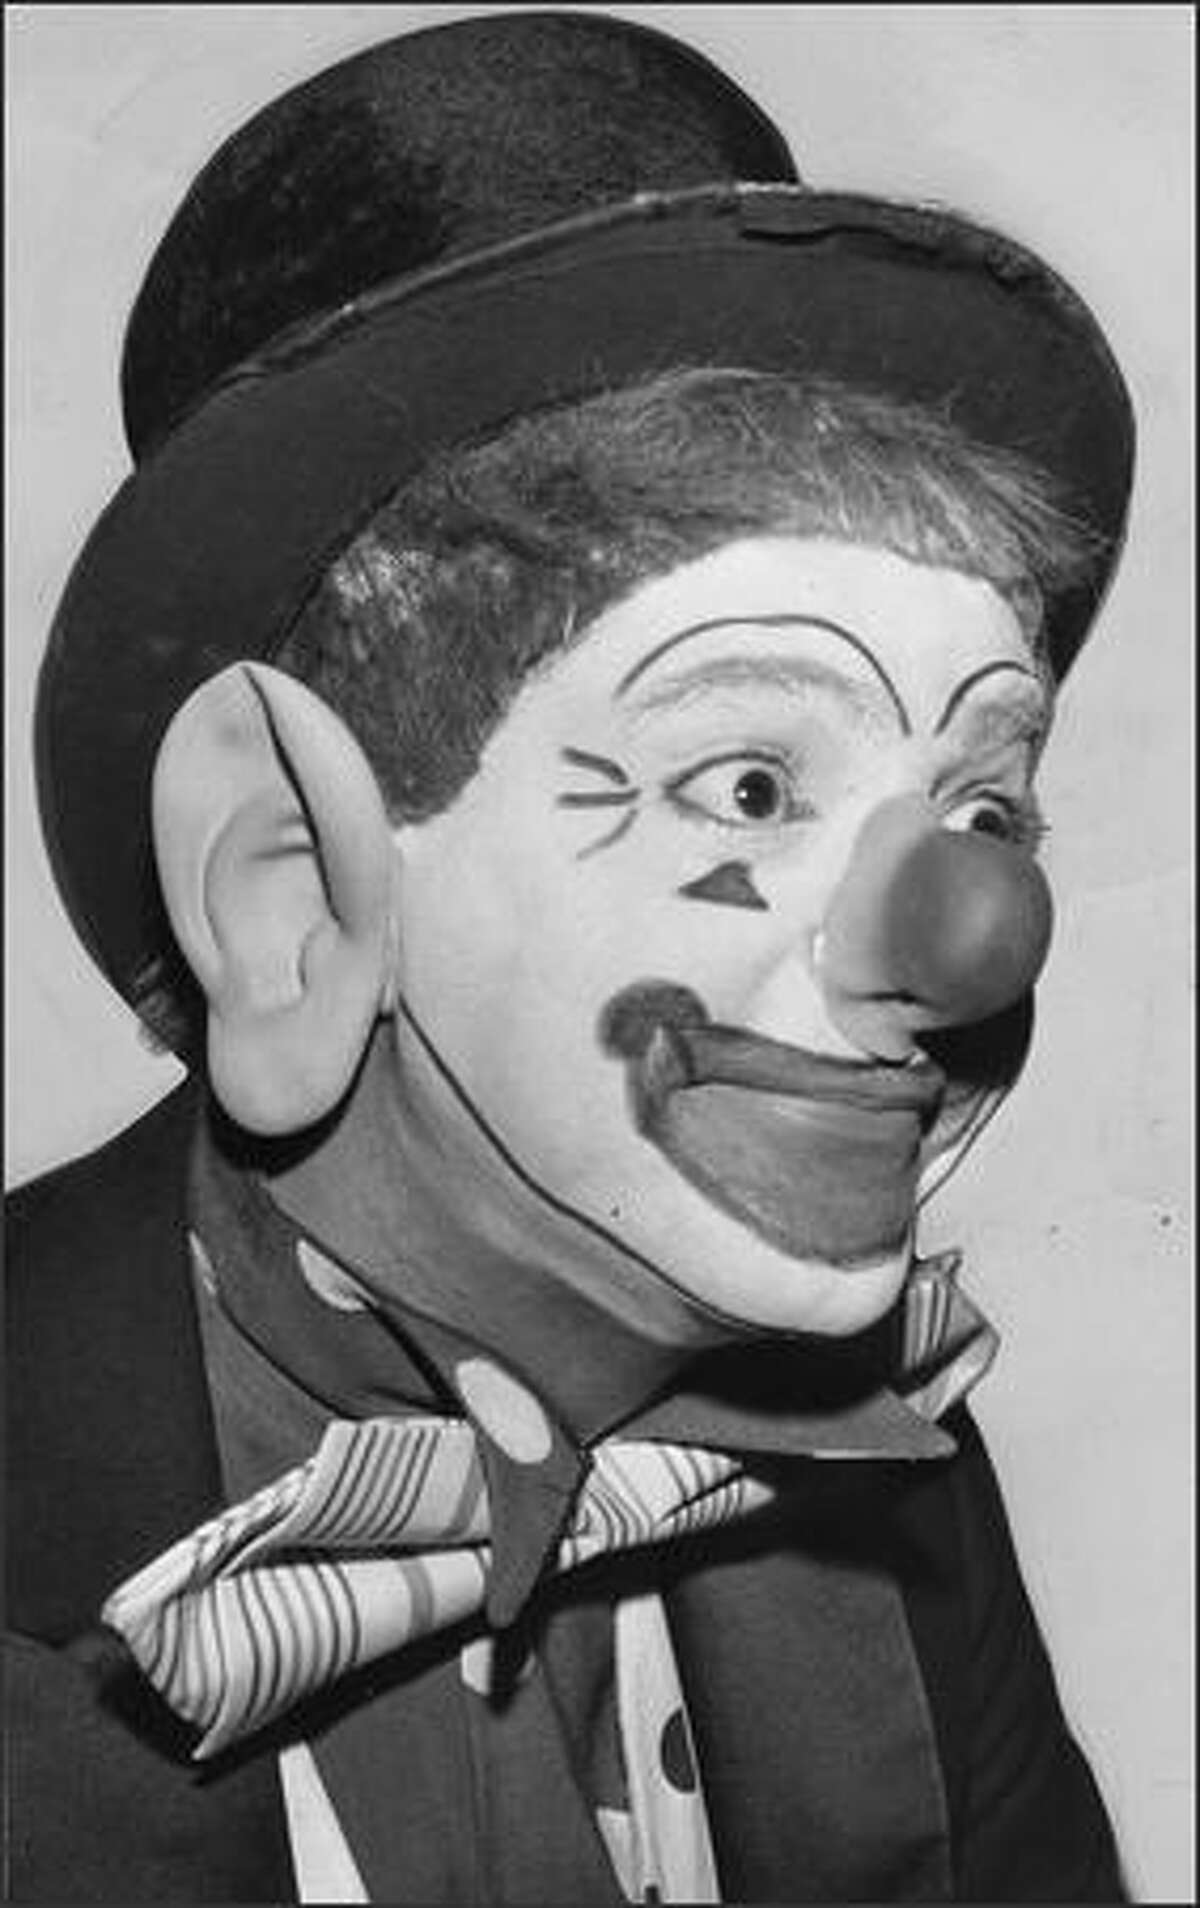 J.P. Patches (portrayed by Chris Wedes) in 1958.